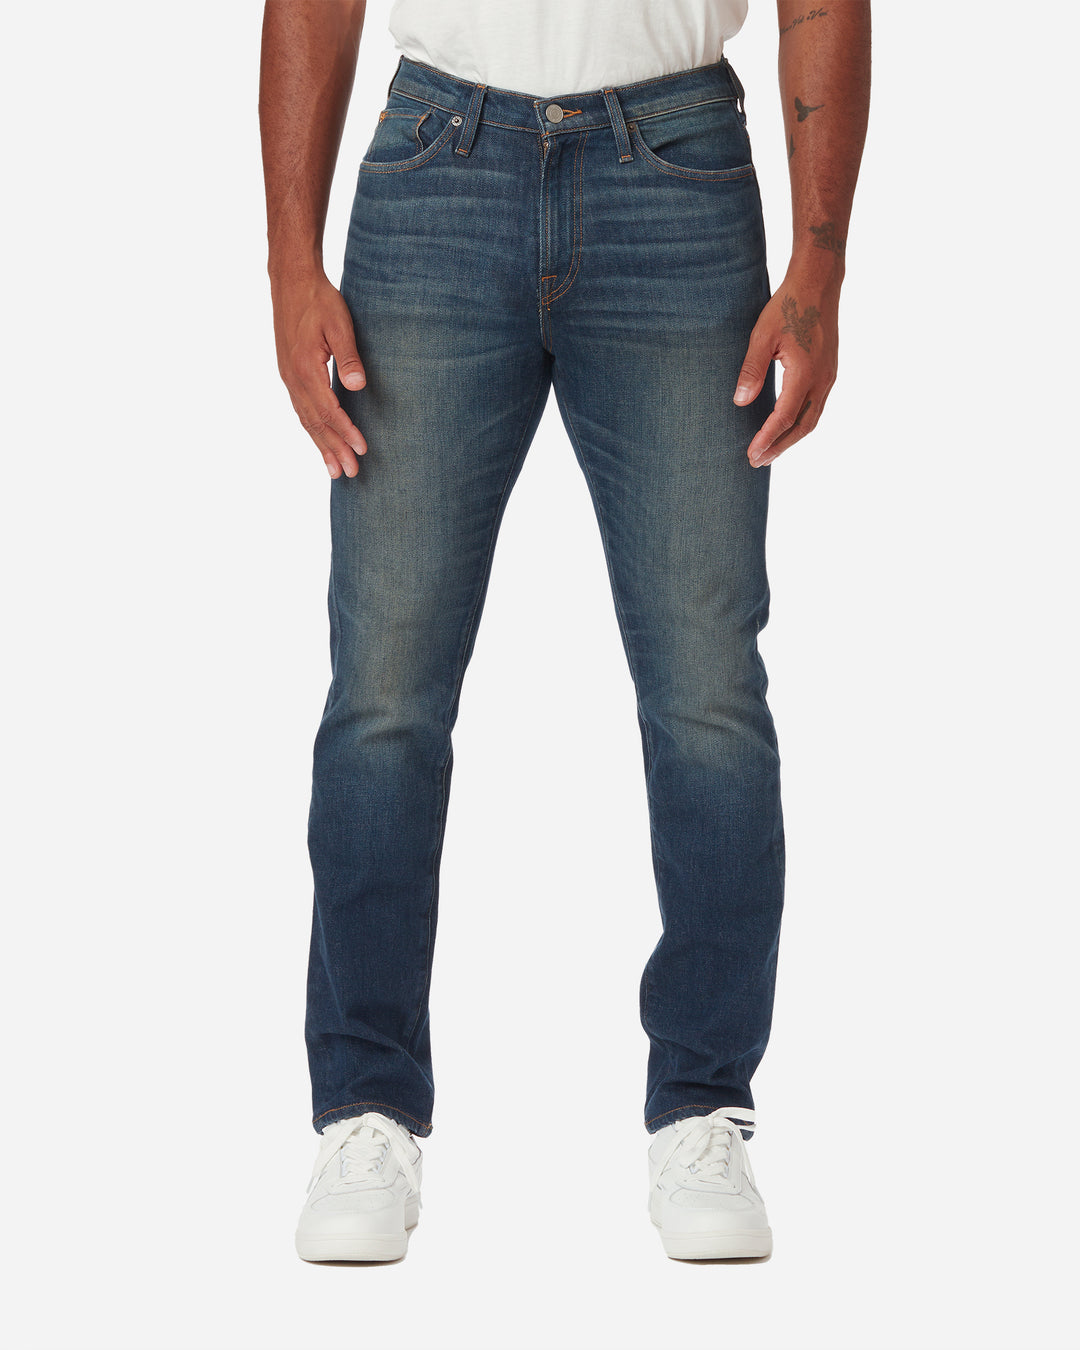 ComfortDenim Stovepipe Jeans 28 Inch - Western Blue Wash